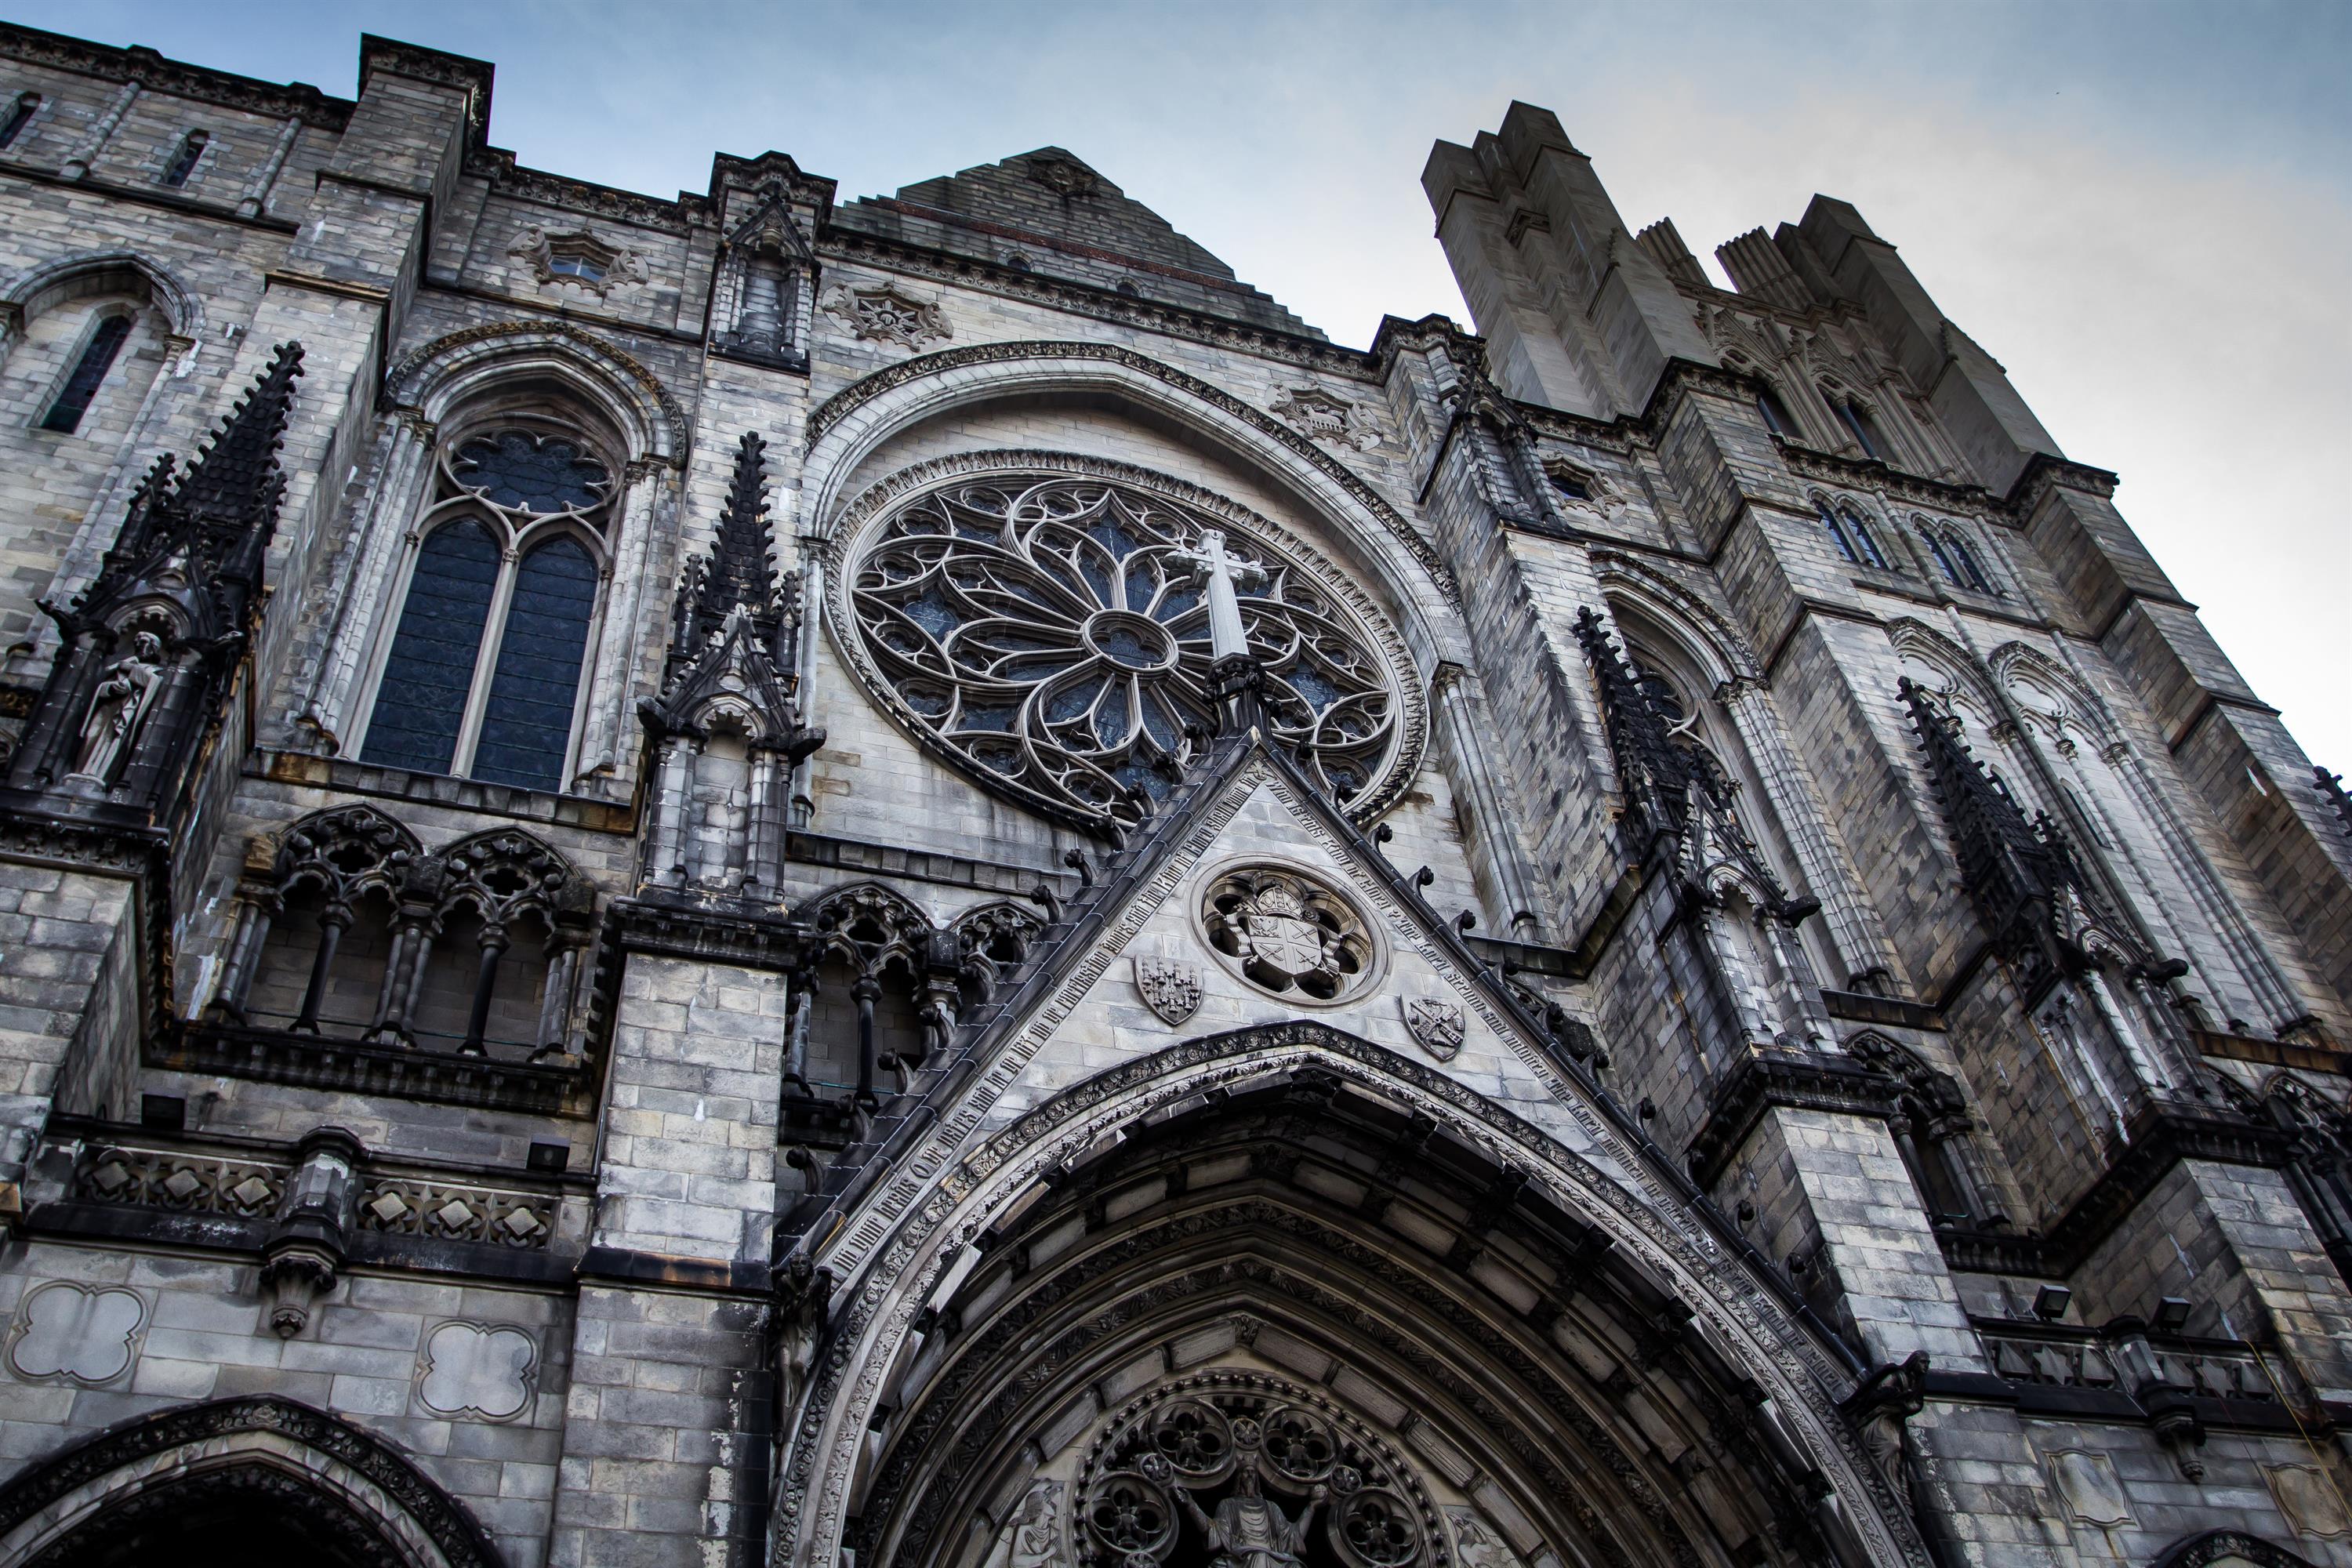 The Cathedral Church of Saint John the Divine | 1047 Amsterdam Ave, New York, NY, 10025 | +1 (212) 316-7540